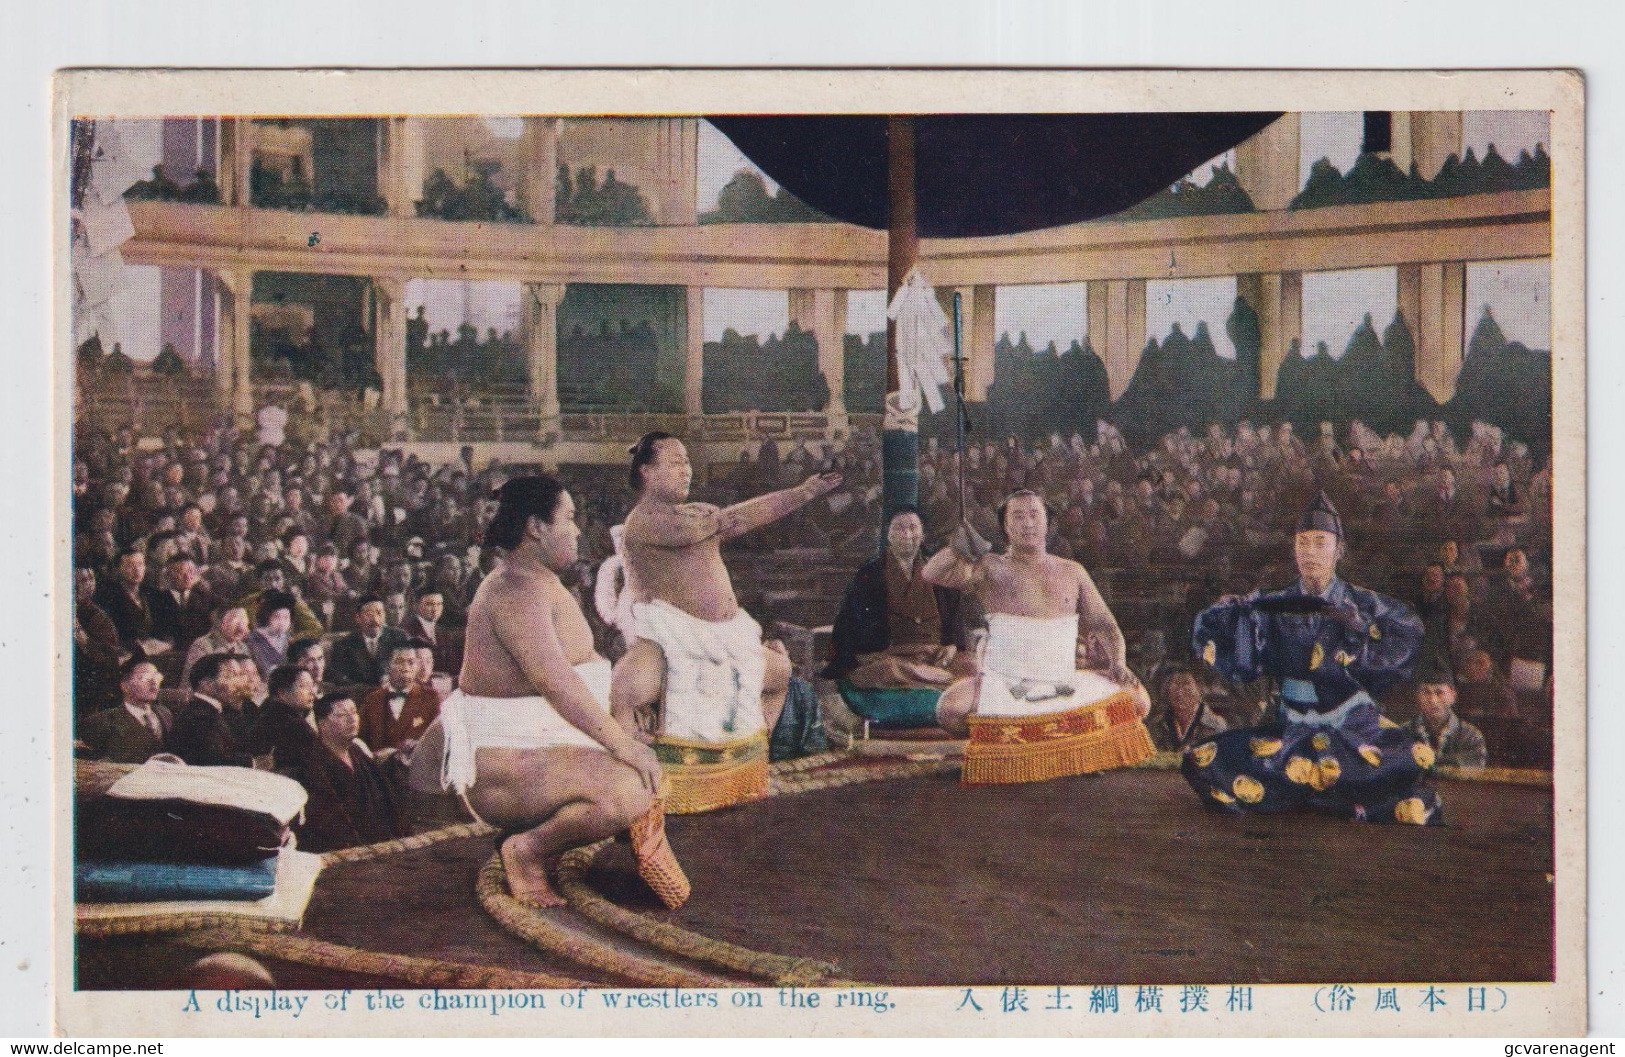 SUMO  YOKOZUMA   1912  A DISPLAY OF THE CHAMPION OF WRESLERS ON THE RING - Artes Marciales